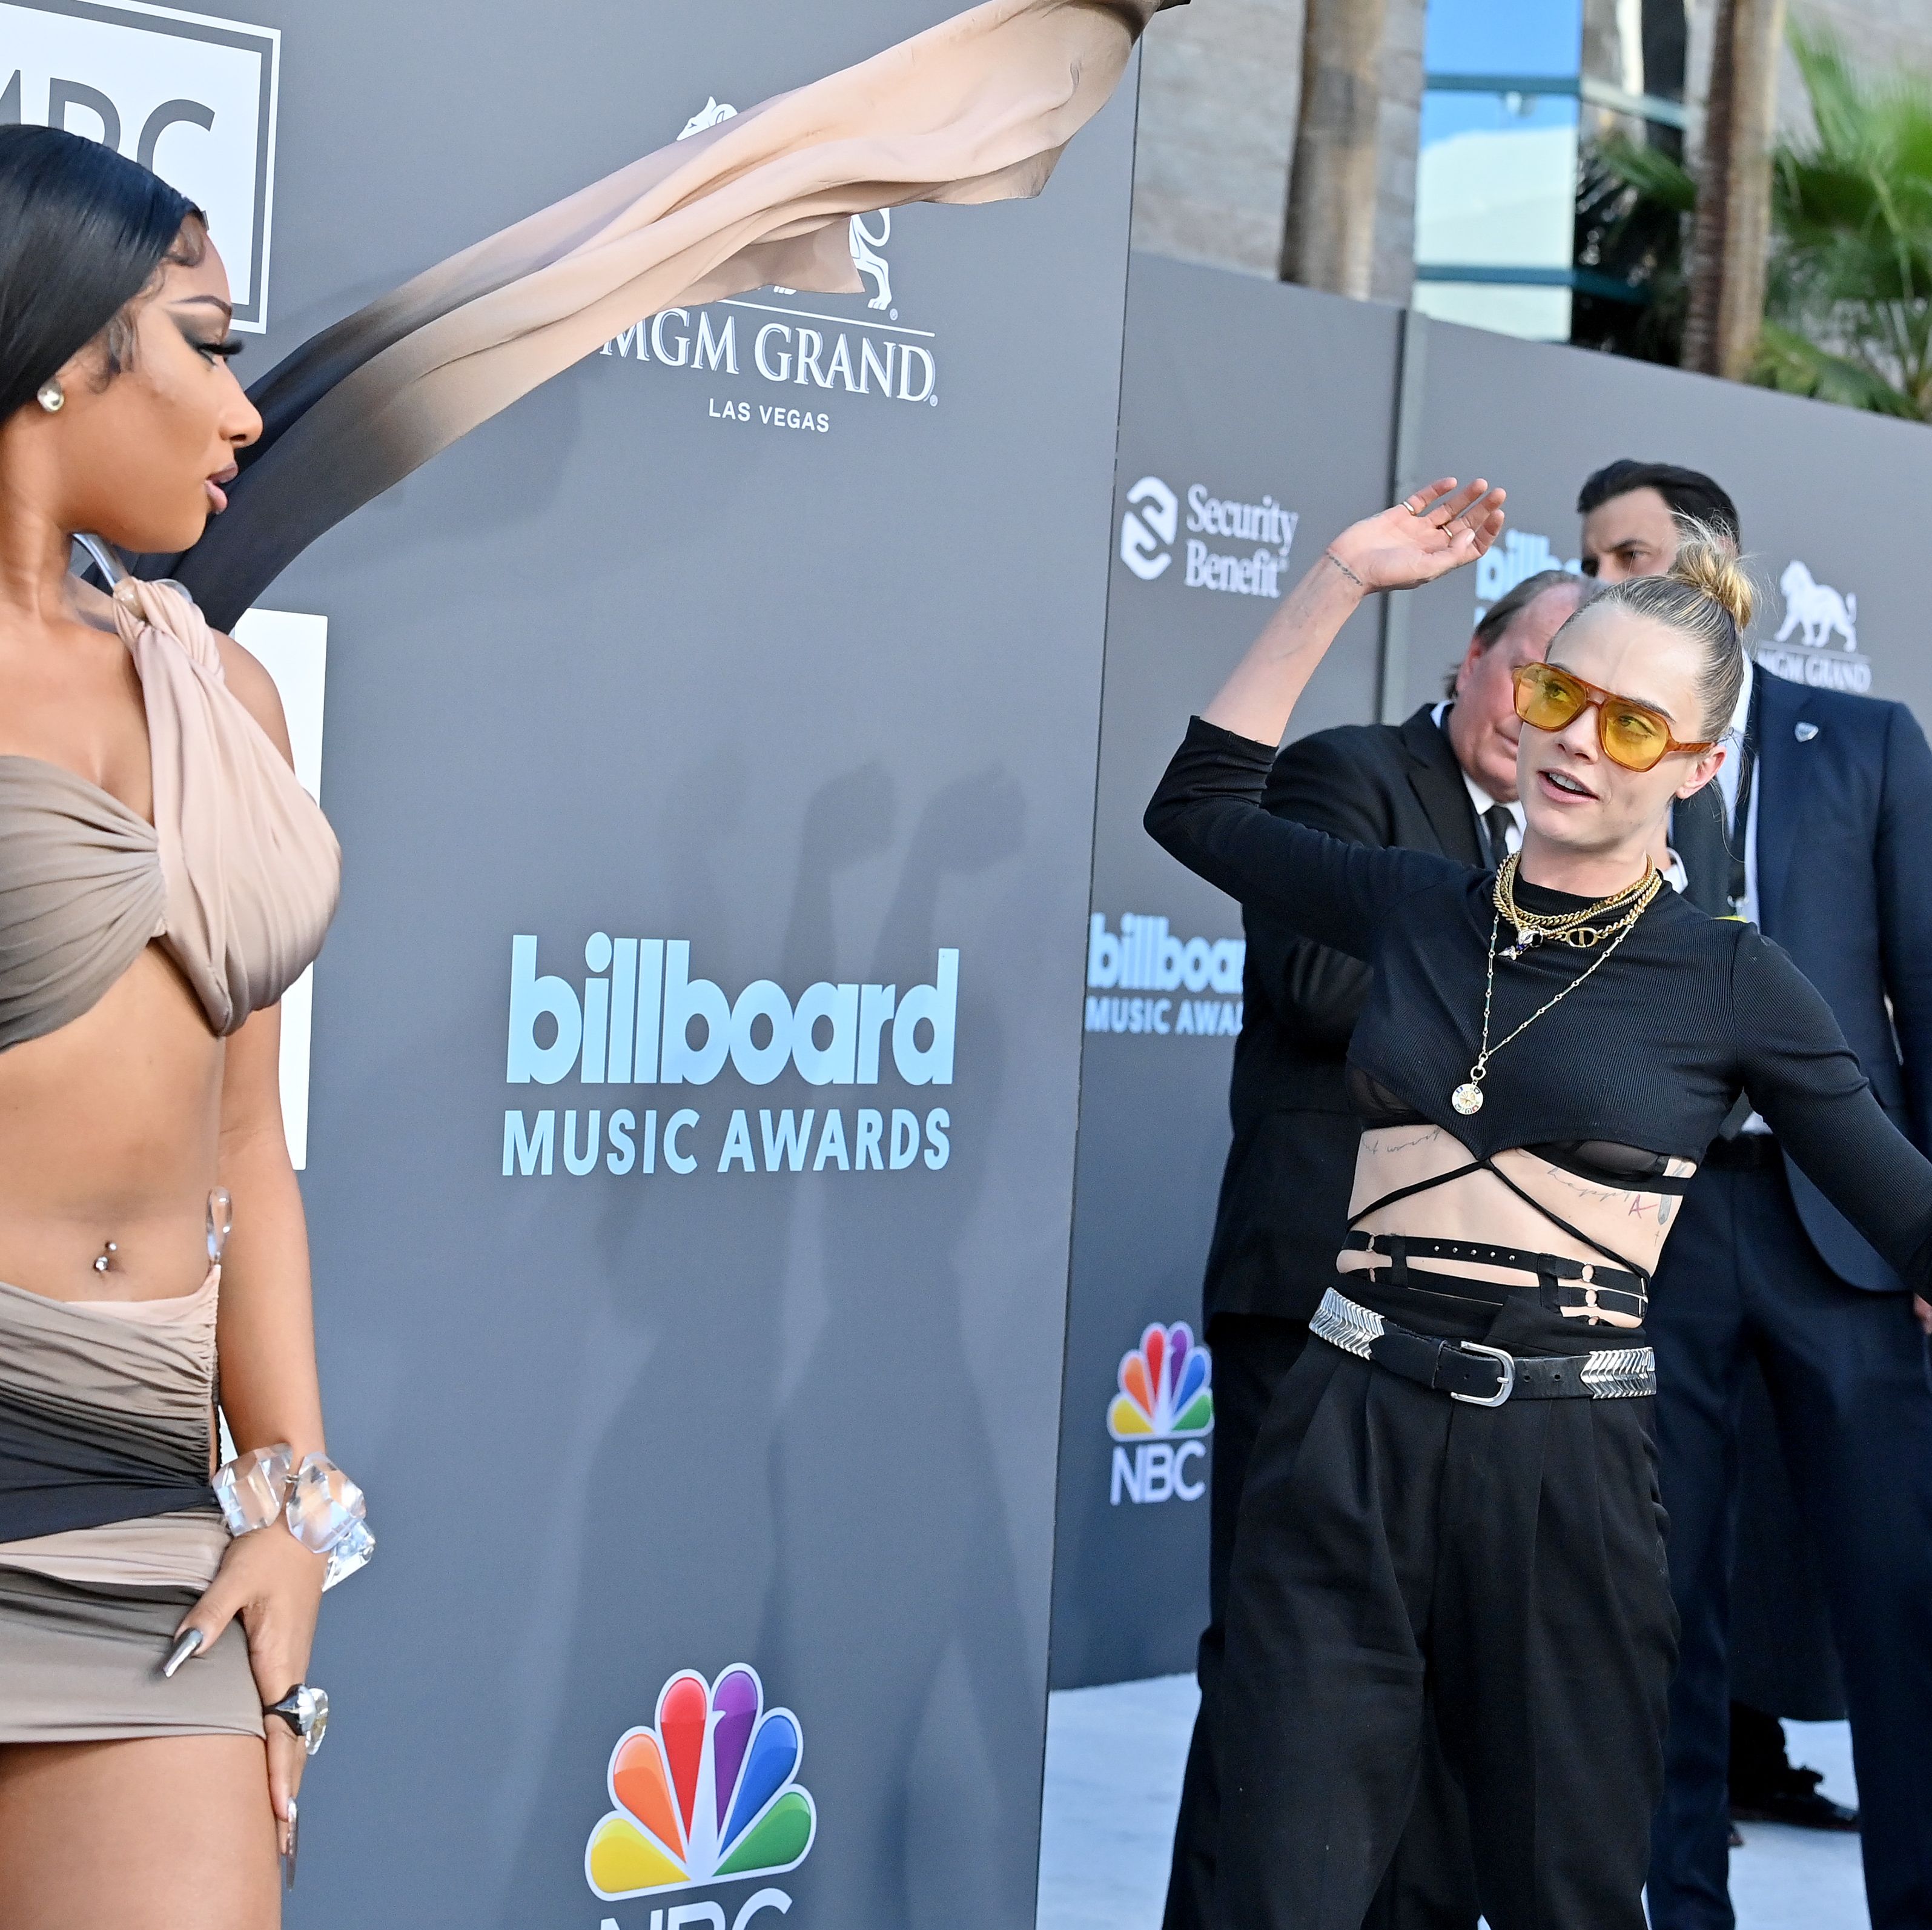 Megan Thee Stallion and Cara ﻿Delevingne Had a Cute Moment on the BBMAs Red Carpet